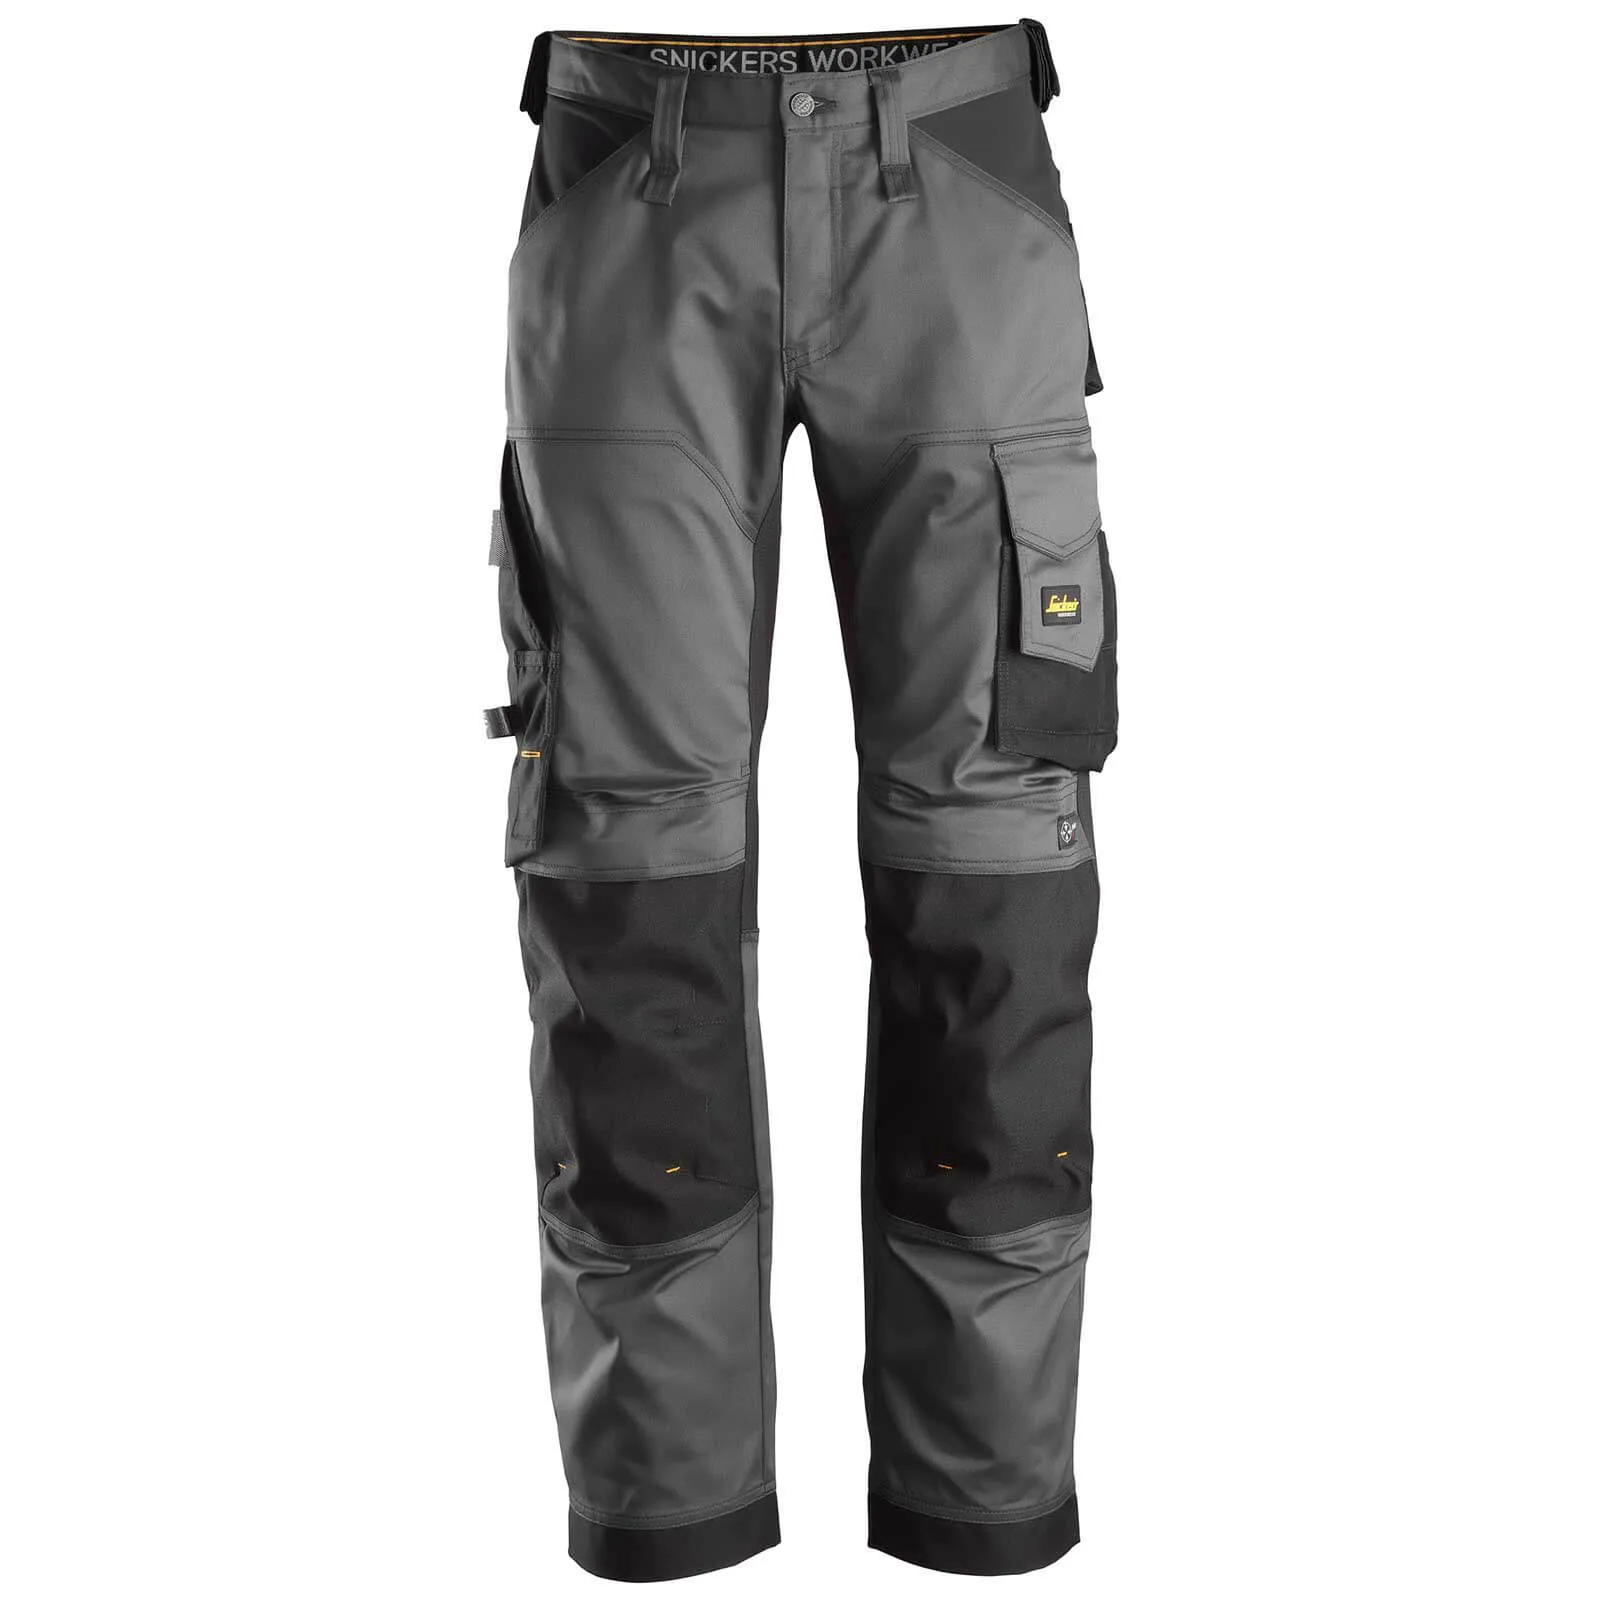 Snickers 6351 Allround Work Stretch Loose Fit Trousers - Steel Grey / Black, 30", 32"